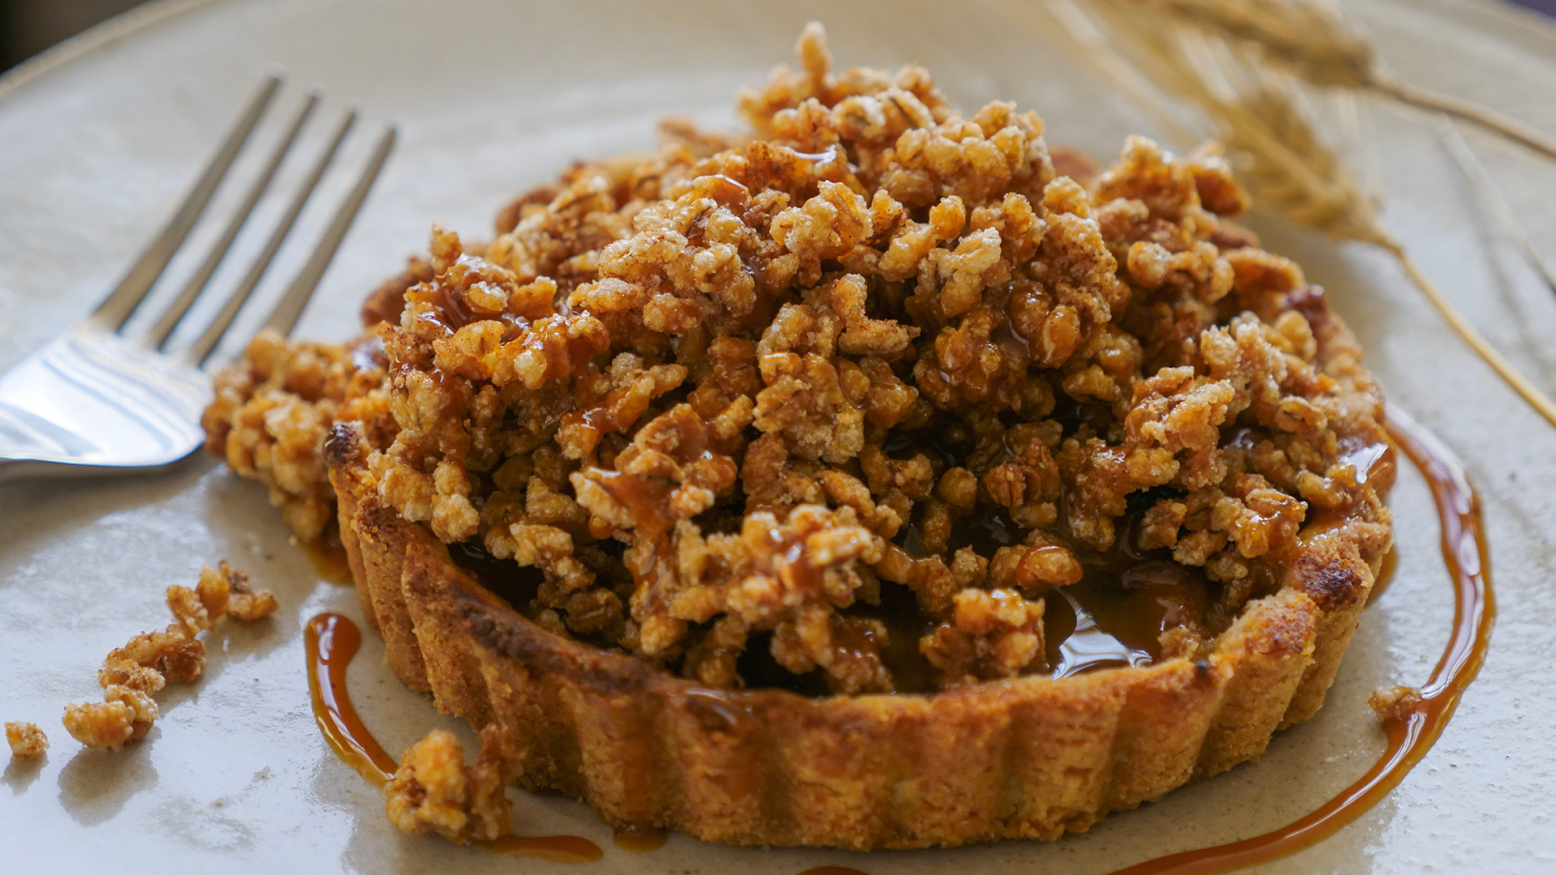 Apple Pie Tarts with Puffed Barley Topping